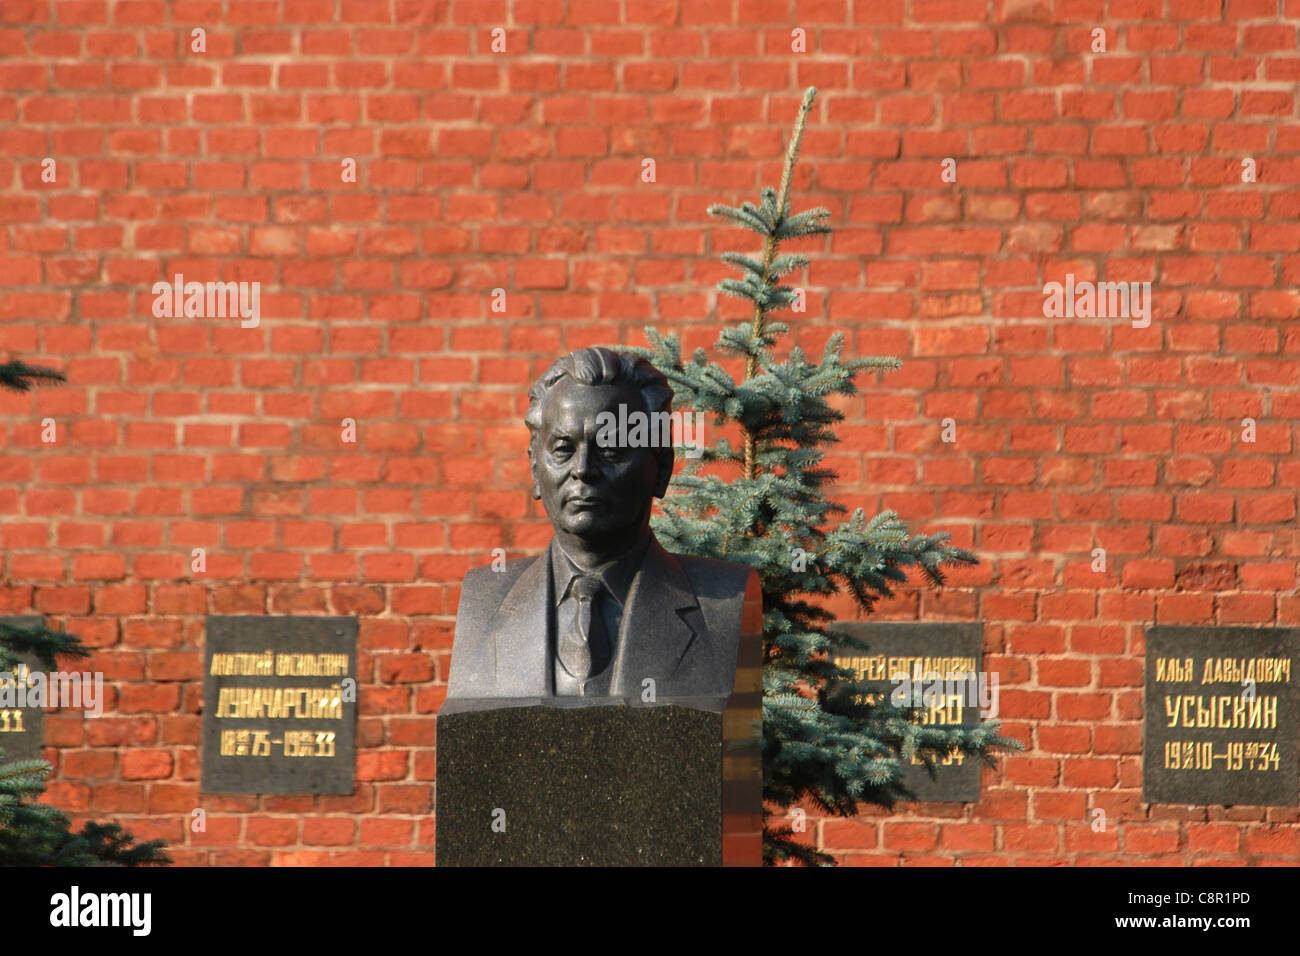 Tomb of Soviet leader Konstantin Chernenko in front of the Kremlin wall at Red Square in Moscow, Russia. Stock Photo